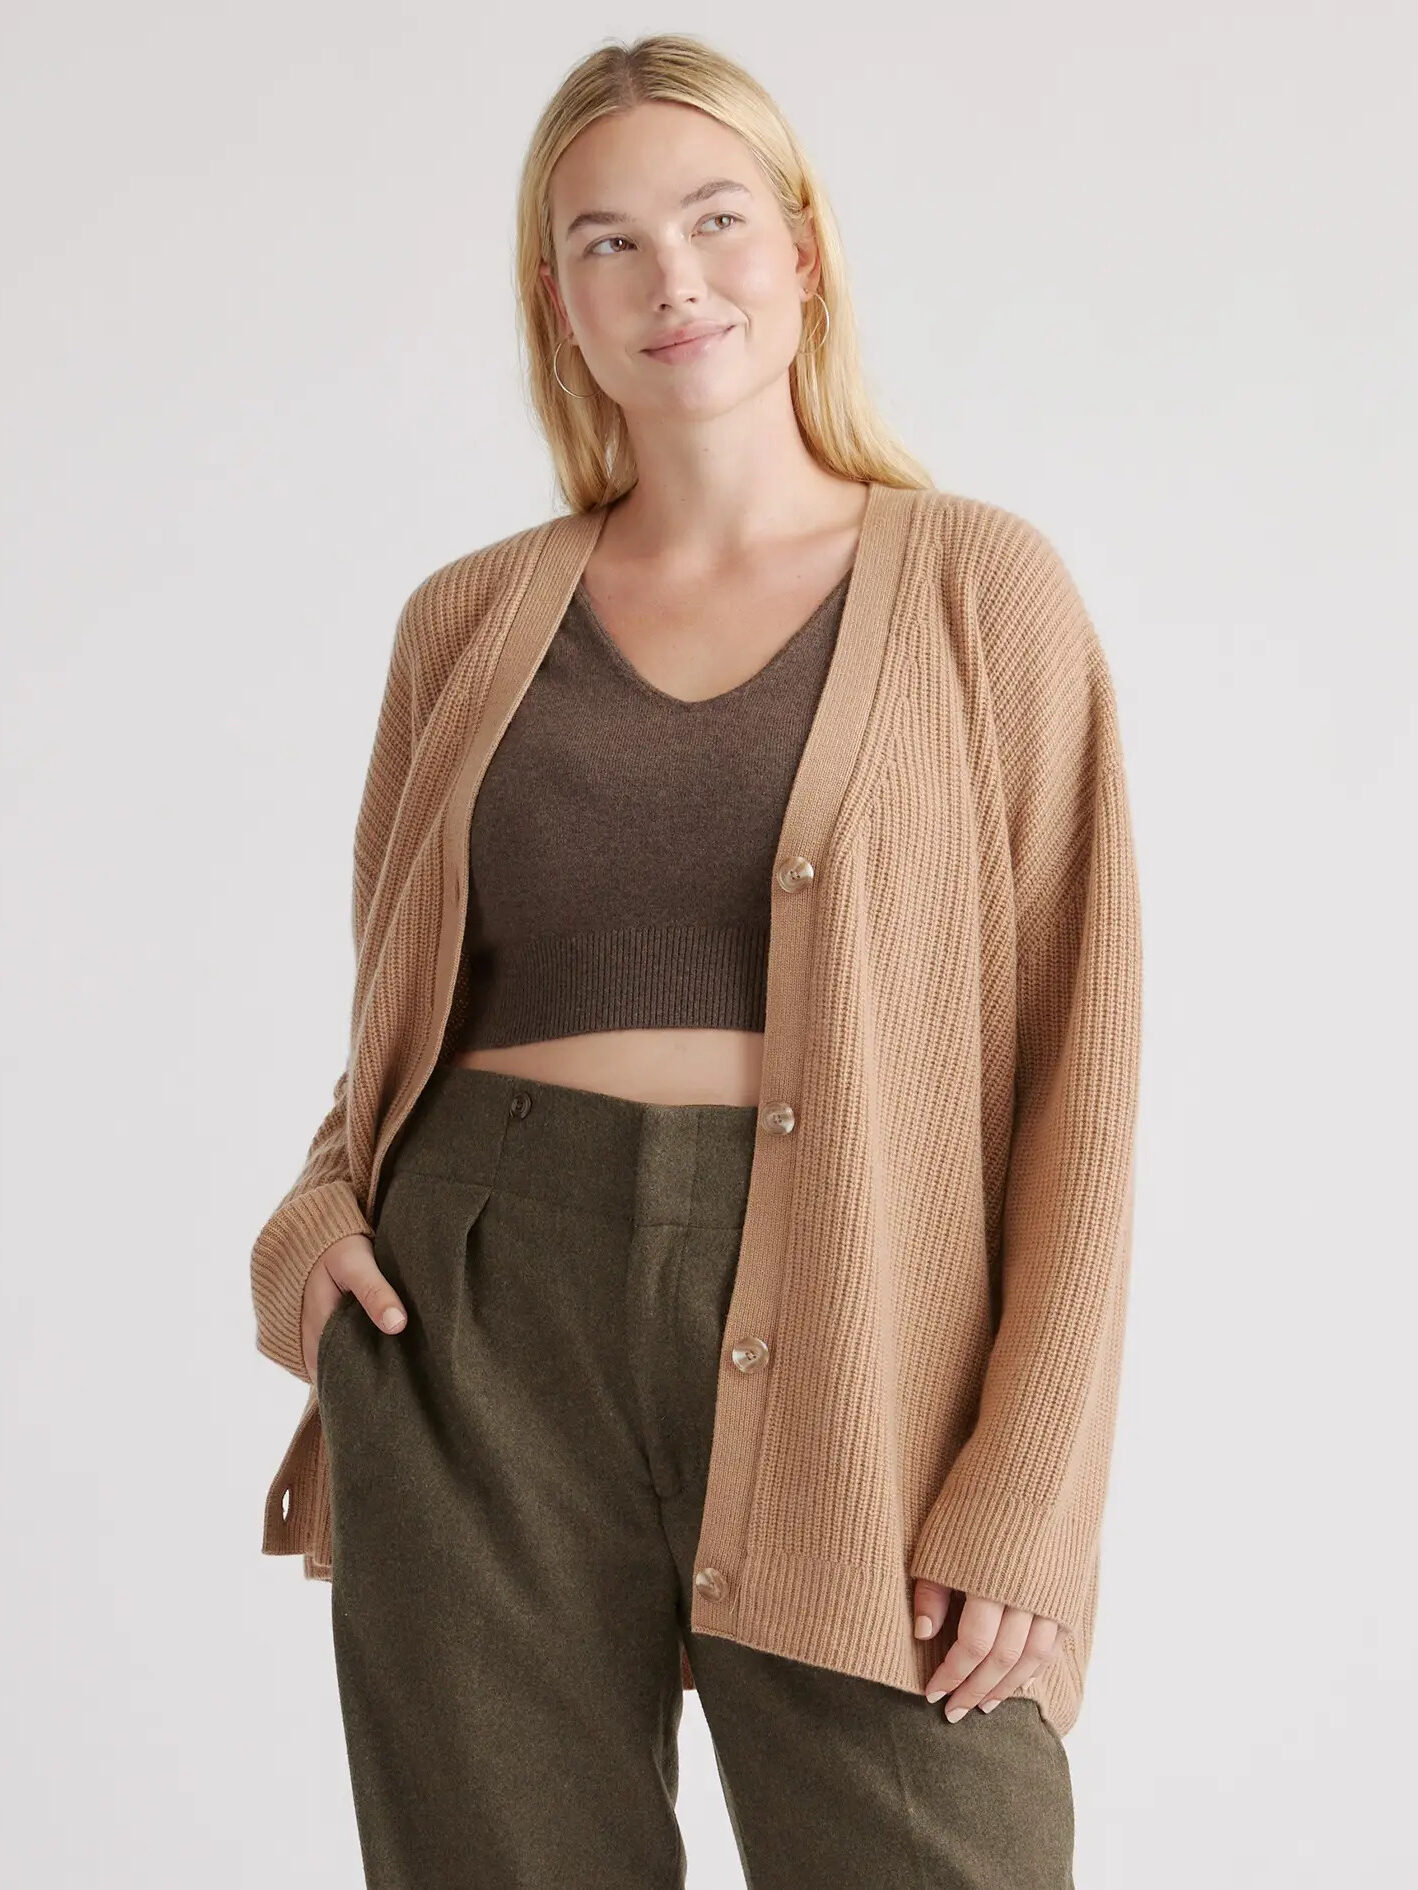 A model wearing a long beige cardigan from Quince.